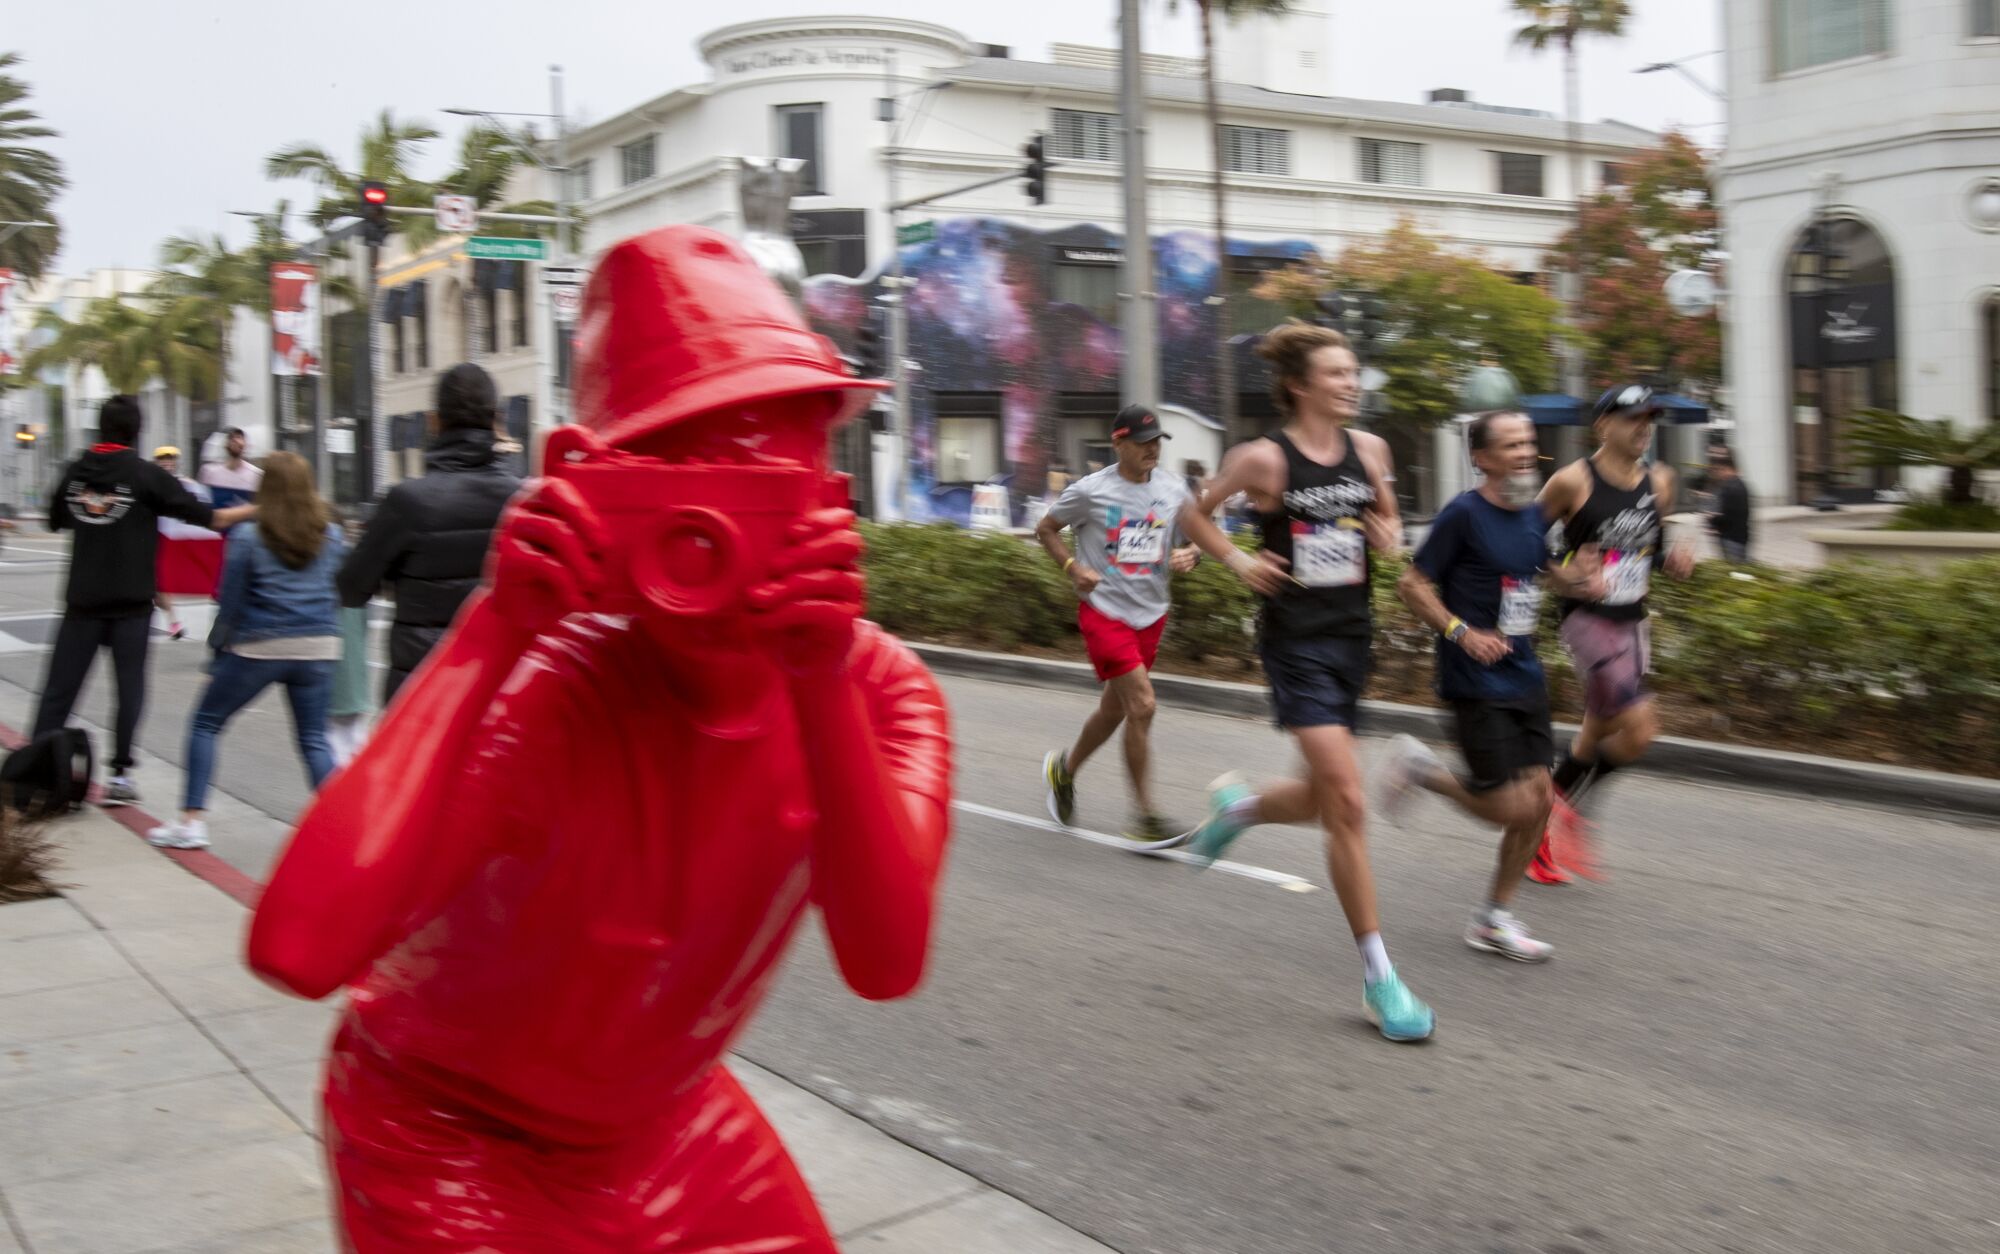 Runners pass a red statue of a camera man on Rodeo Drive